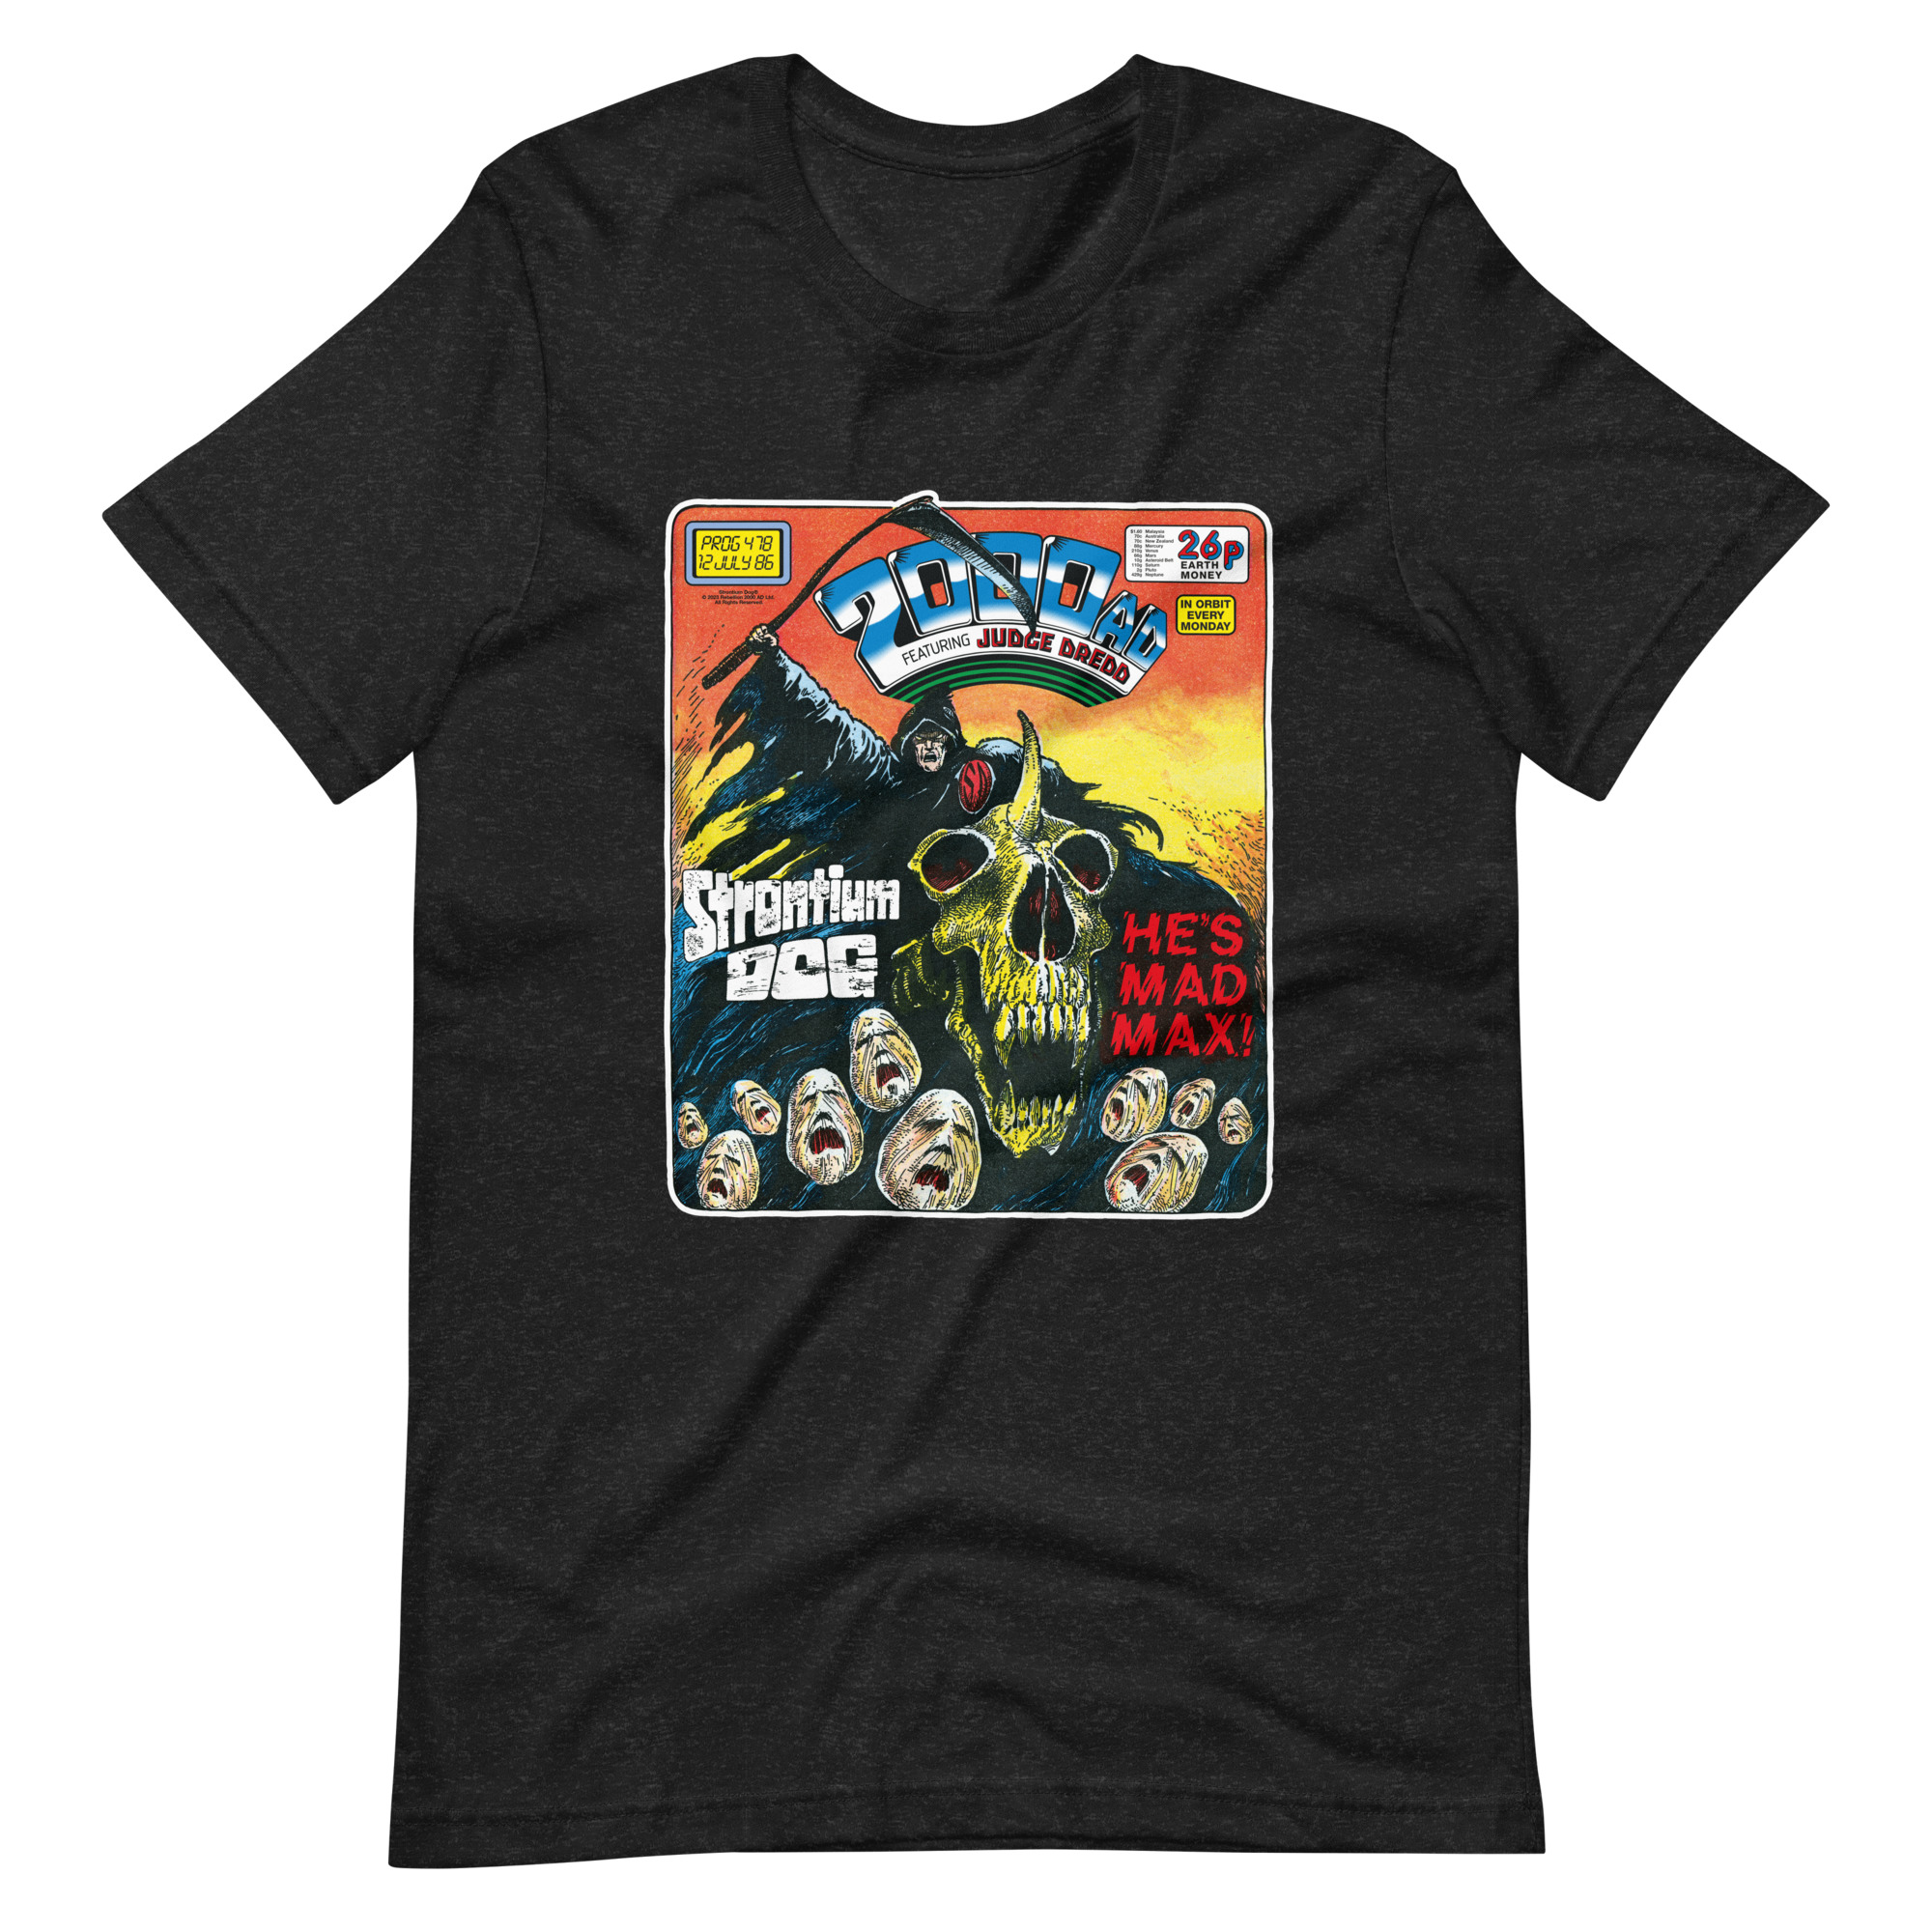 Charcoal grey Tshirt with an image on the chest. Image is cover of 2000 AD Prog 478 and depicts a man in a black hood, ragged cape and atop at horned skeleton beast while holding aloft a scythe above a sea of tormented faces! Metal.